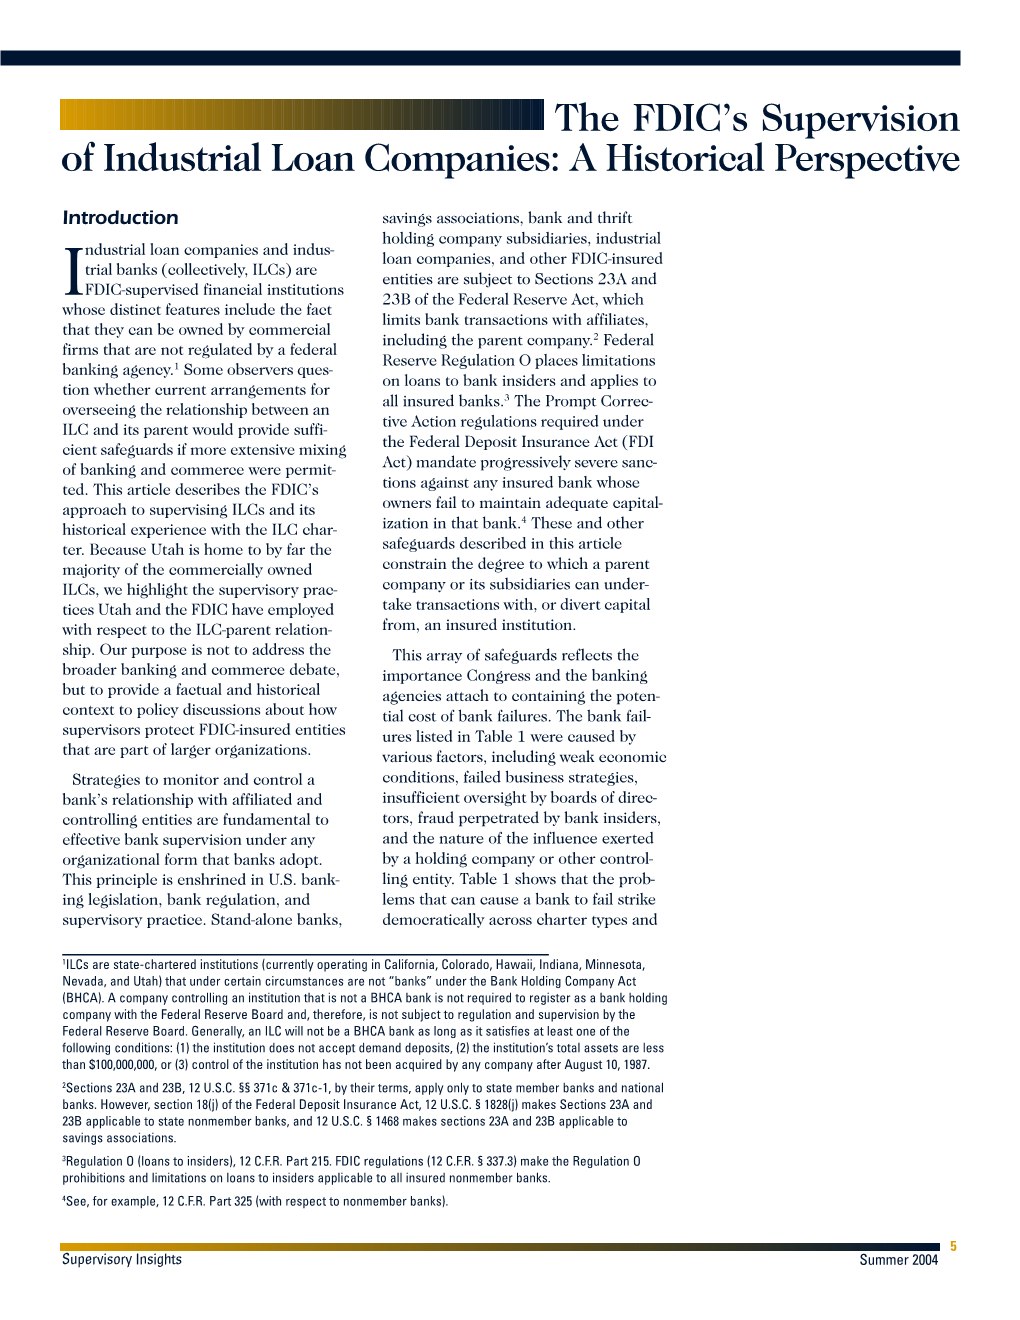 The FDIC's Supervision of Industrial Loan Companies